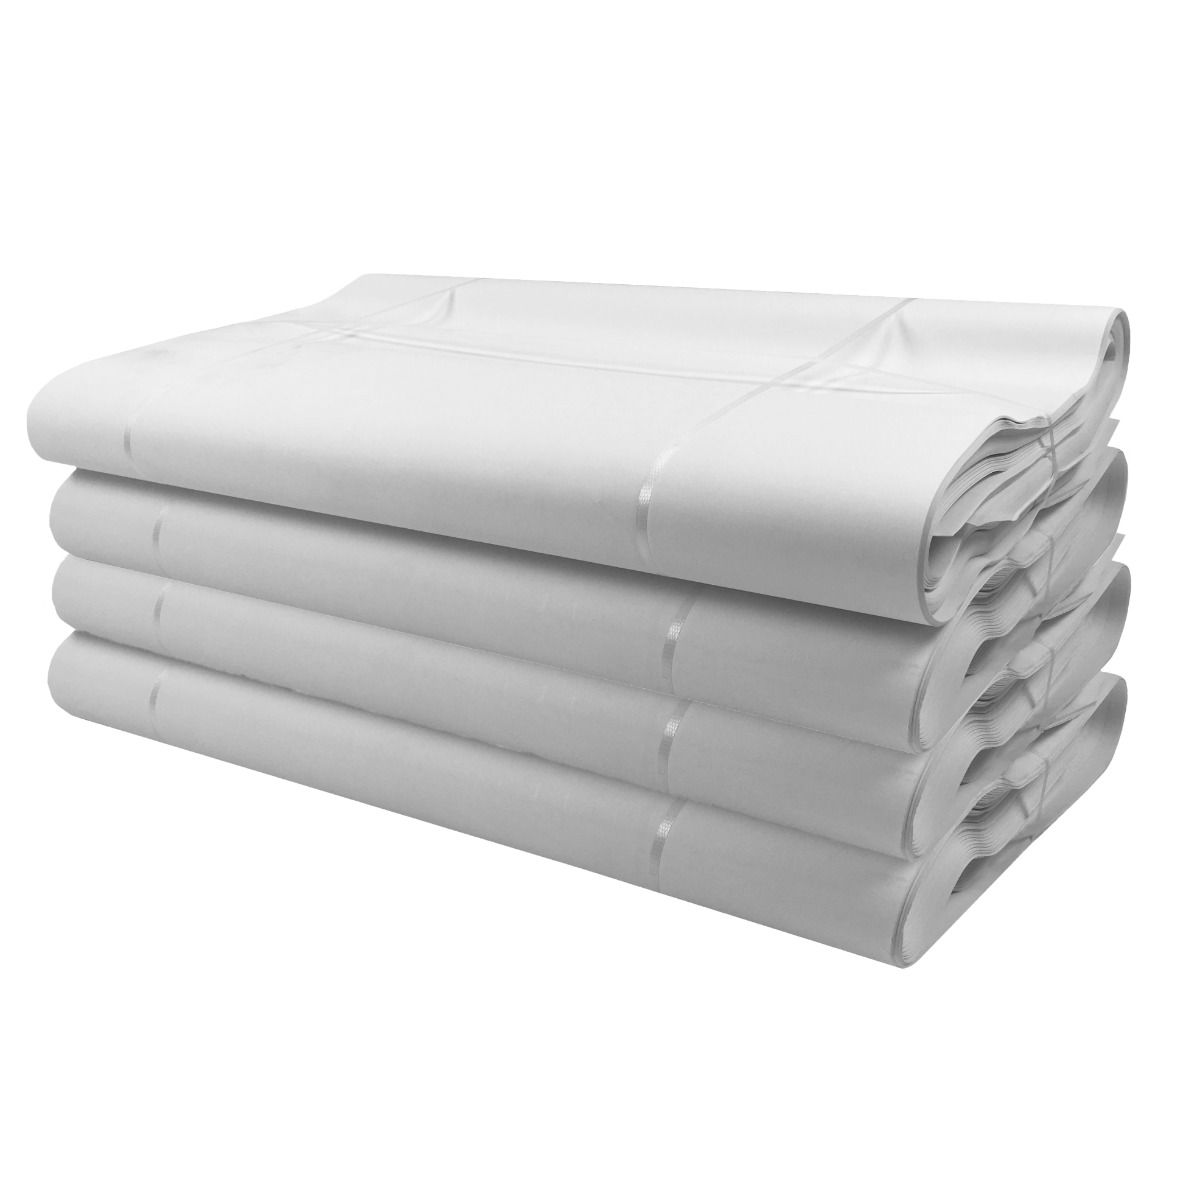 White Newsprint Packing Paper for Shipping 31 x 21.5, Pack of 125 Moving  Paper Packing Sheets, 5 lbs Newsprint Paper for Packing, Wrapping, Shipping  Paper Sheets, Packaging Paper For Moving 